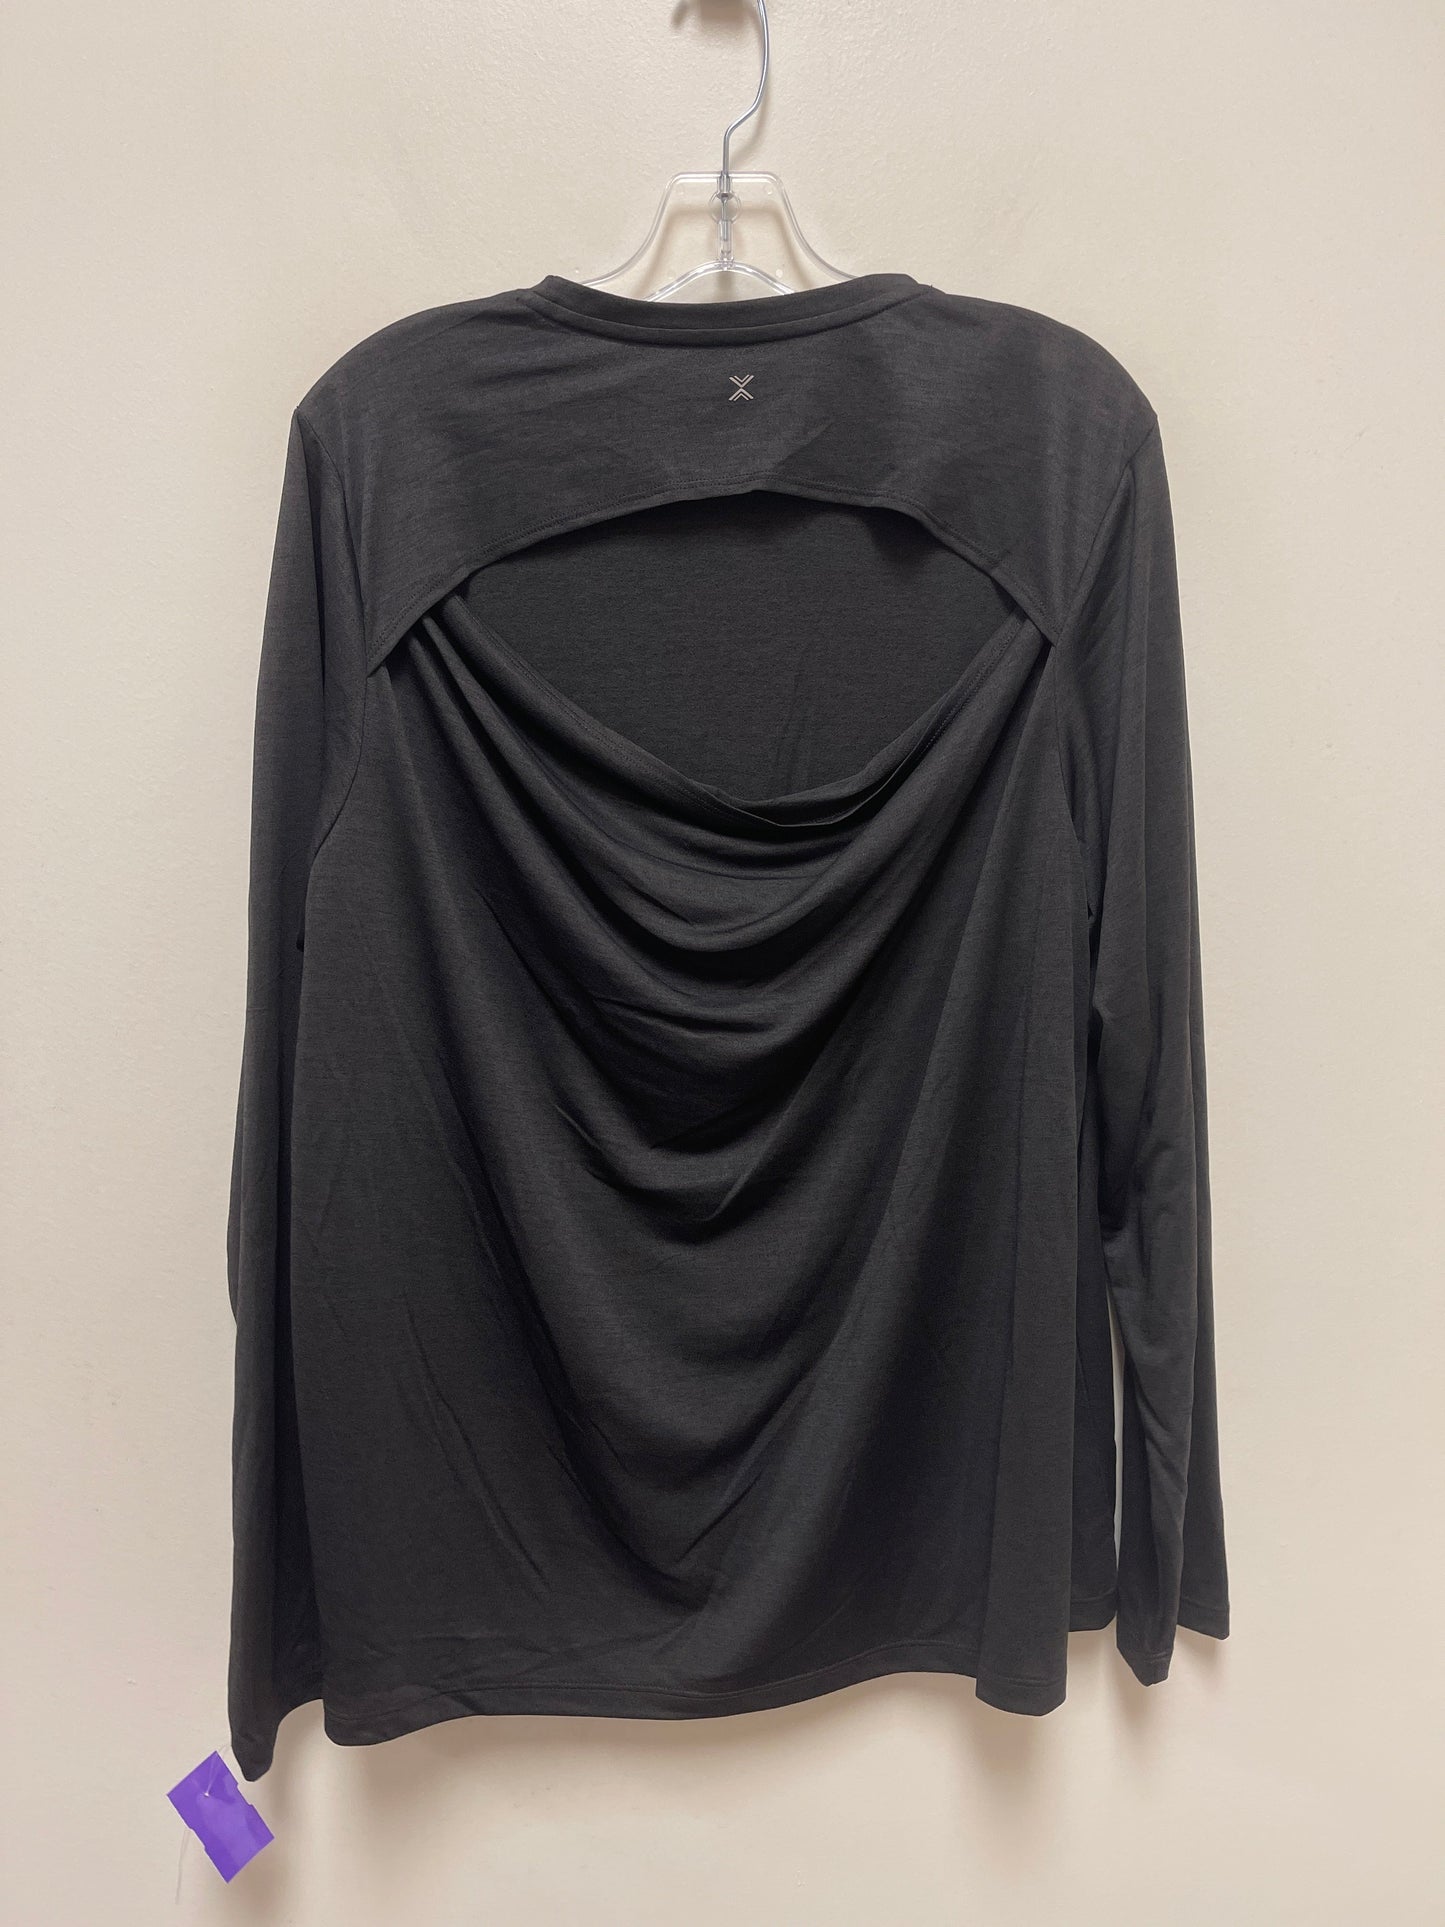 Athletic Top Long Sleeve Collar By Xersion  Size: 2x